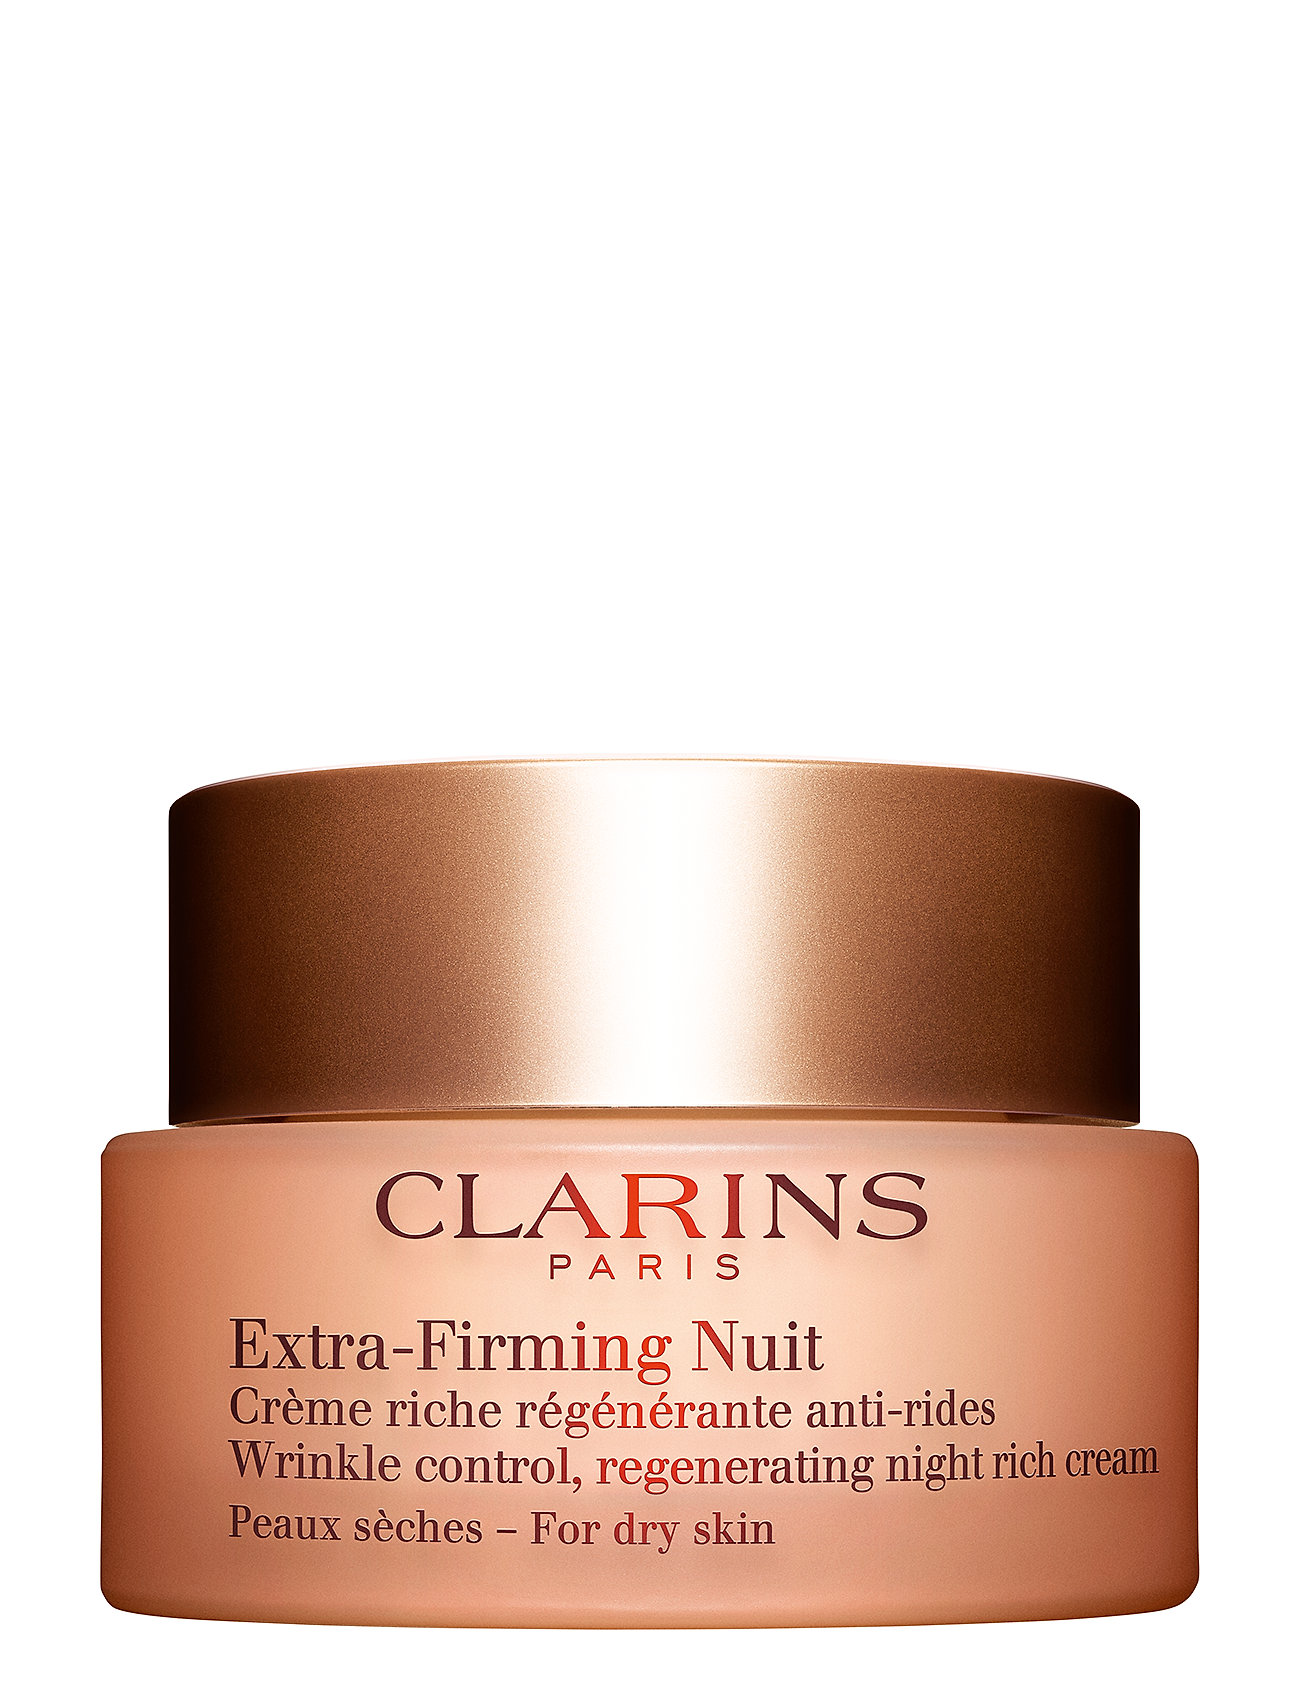 Extra-Firming Nuit For Dry Skin Beauty Women Skin Care Face Moisturizers Night Cream Clarins